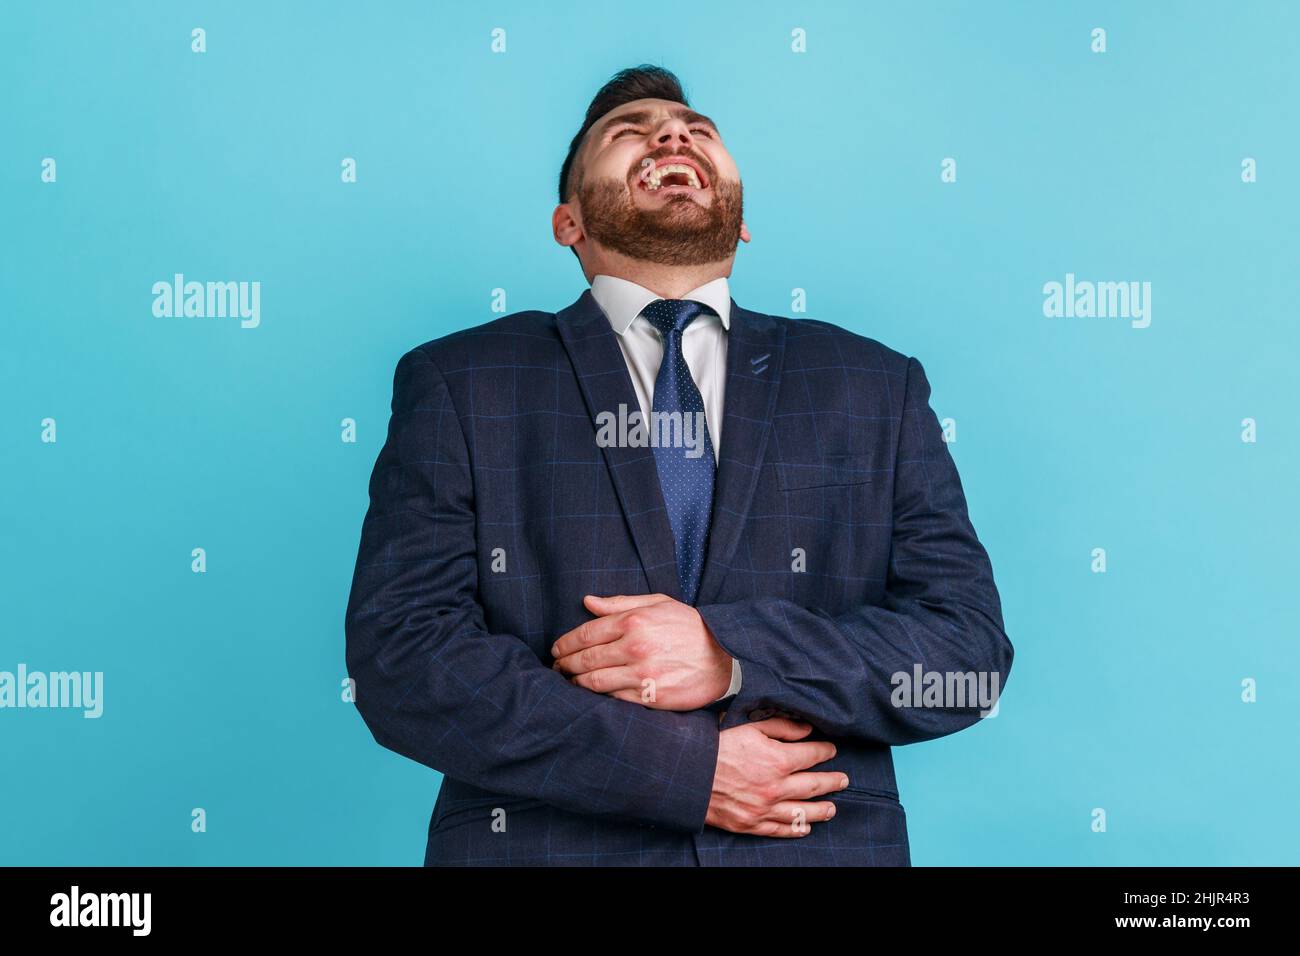 Positive bearded man wearing official style suit holding his belly and laughing out loud, chuckling and hysterically laughing with anecdote, having fun. Indoor studio shot isolated on blue background. Stock Photo